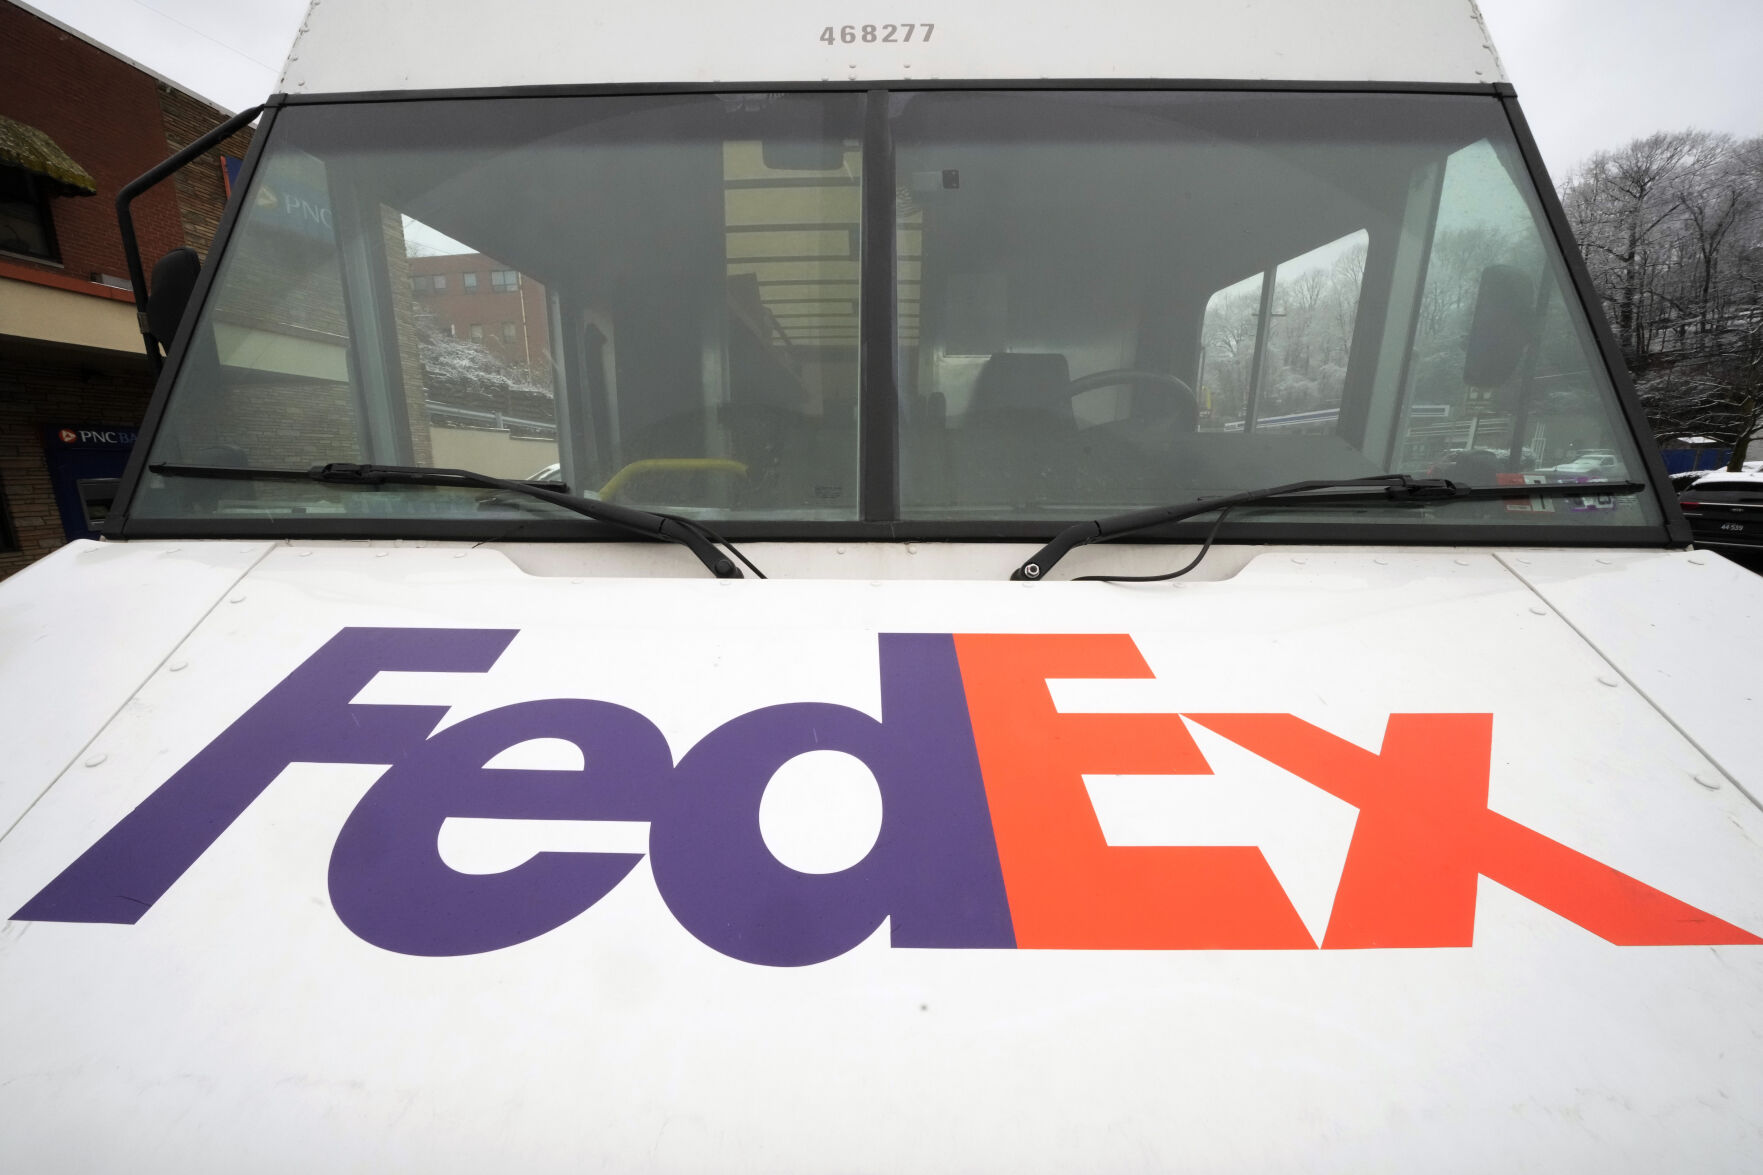 <p>A FedEx truck makes deliveries in Mount Lebanon, Pa., on Monday, Jan. 23, 2023. FedEx will combine its air, ground and other divisions as part of a $4 billion cost cutting plan. The delivery company said Wednesday, April 5, that FedEx Express, FedEx Ground, FedEx Services and other FedEx operating companies will be rolled into Federal Express Corp. by June 2024. (AP Photo/Gene J. Puskar)</p>   PHOTO CREDIT: Gene J. Puskar